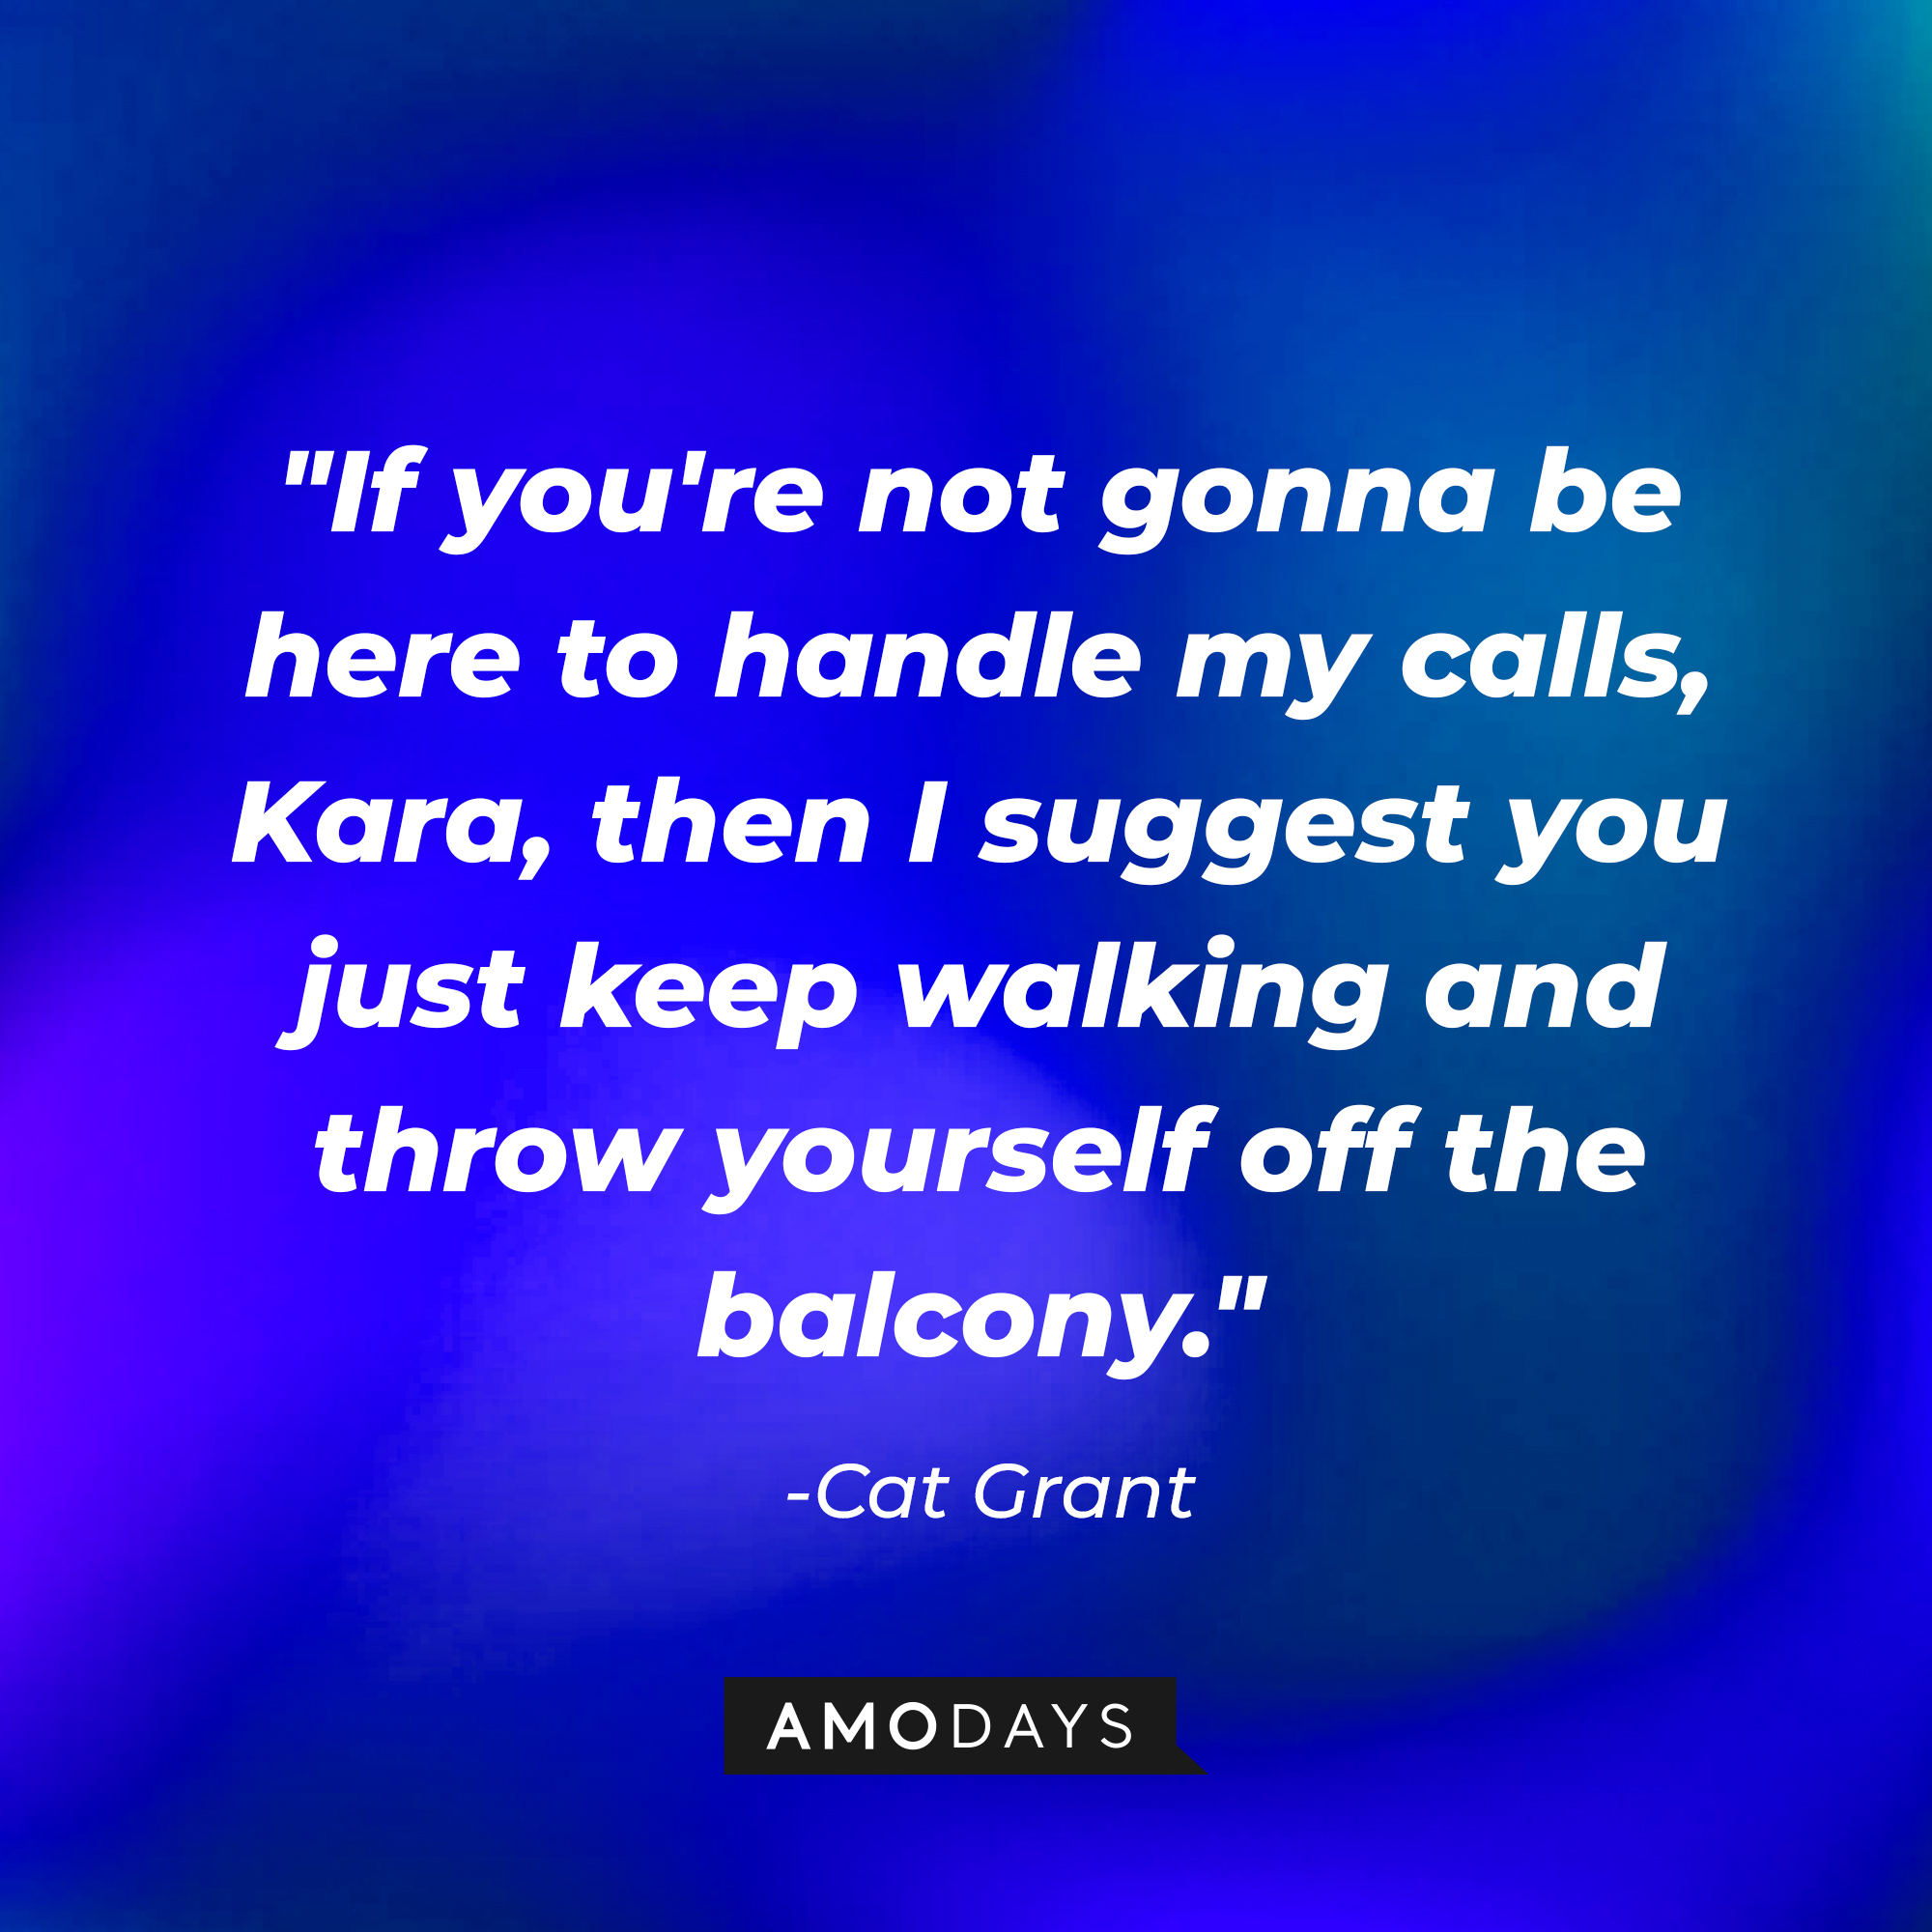 Cat Grant's quote: "If you're not gonna be here to handle my calls, Kara, then I suggest you just keep walking and throw yourself off the balcony." | Source: AmoDays